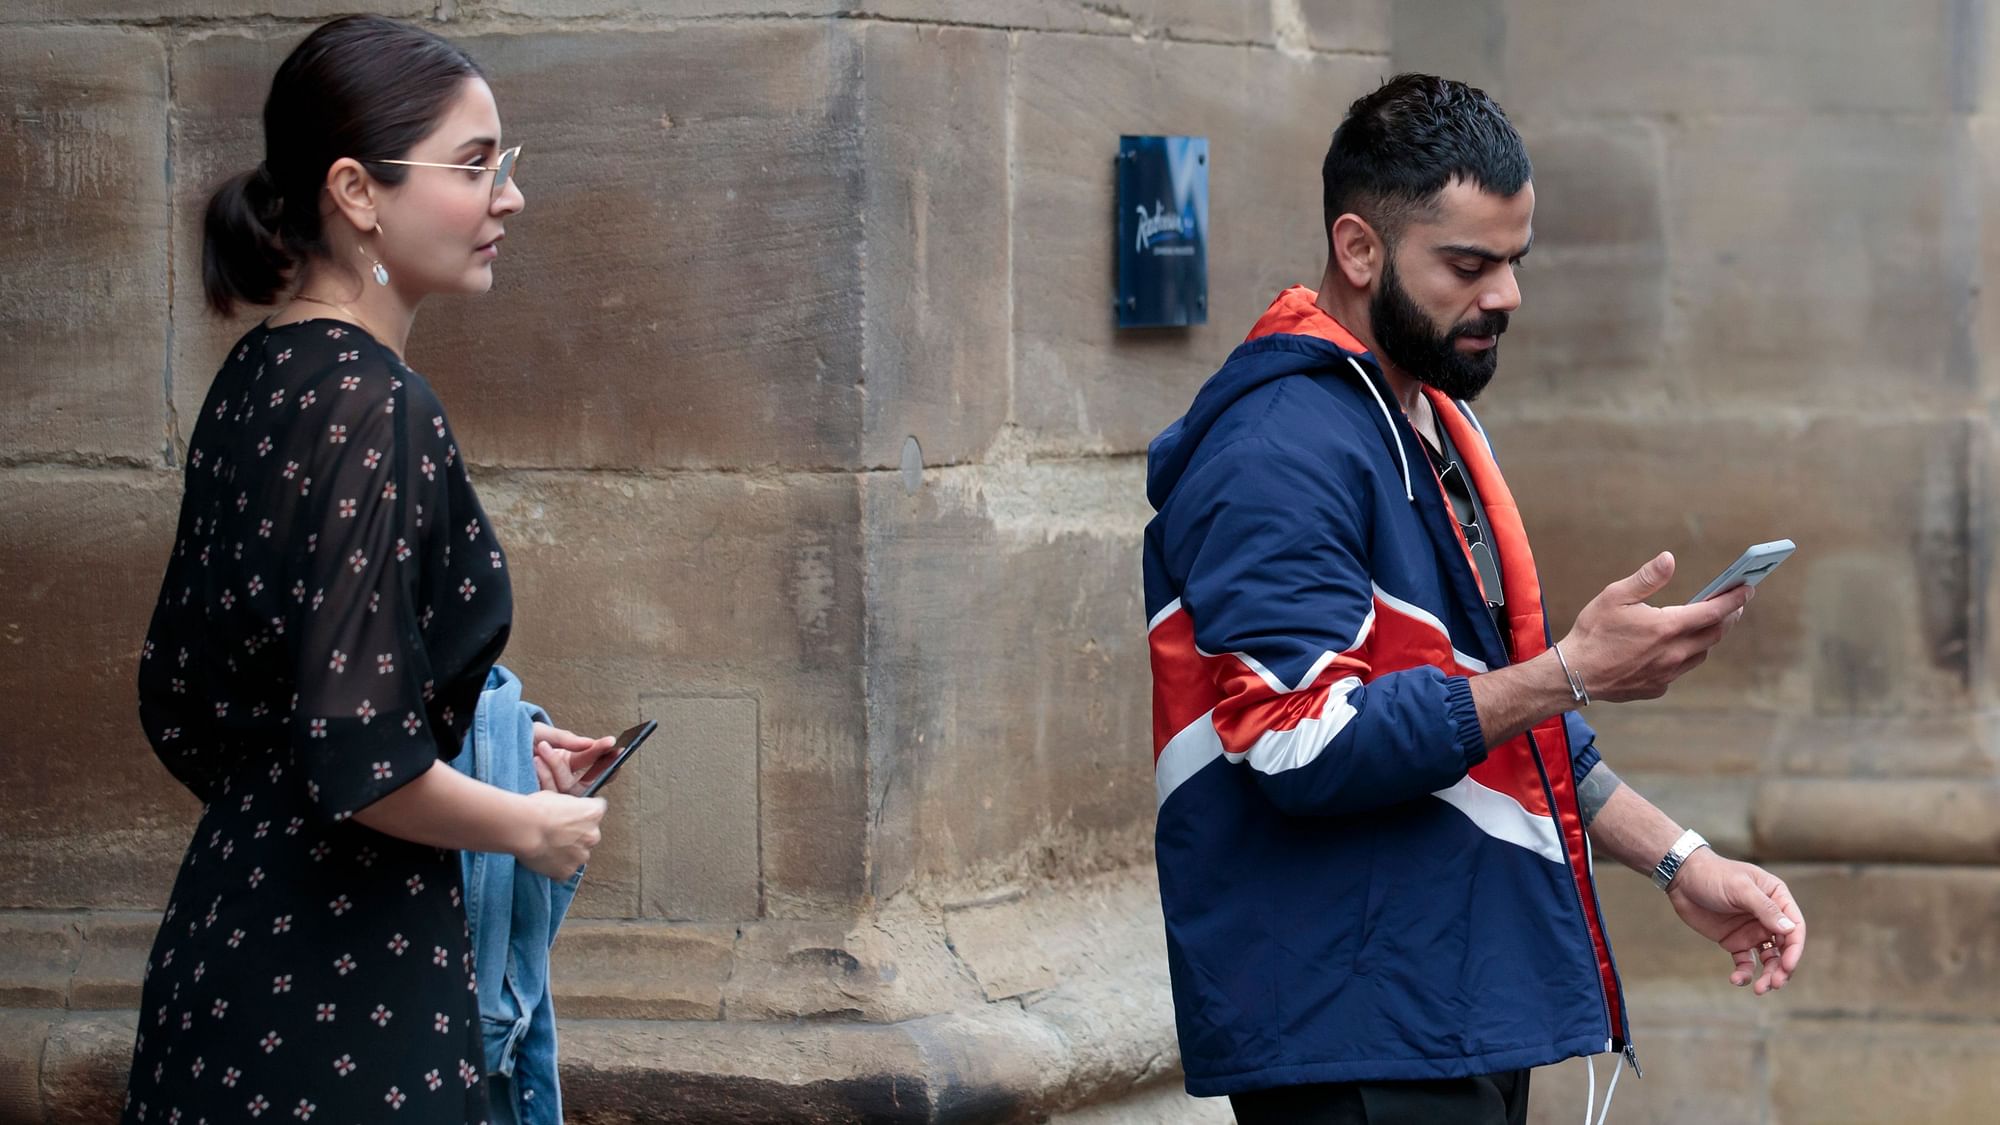 India cricket captain Virat Kohli leaves the team hotel in Manchester city centre, the day after his team stumbled to an 18-run defeat by New Zealand at Old Trafford cricket ground in Manchester, England, Thursday, July 11, 2019.